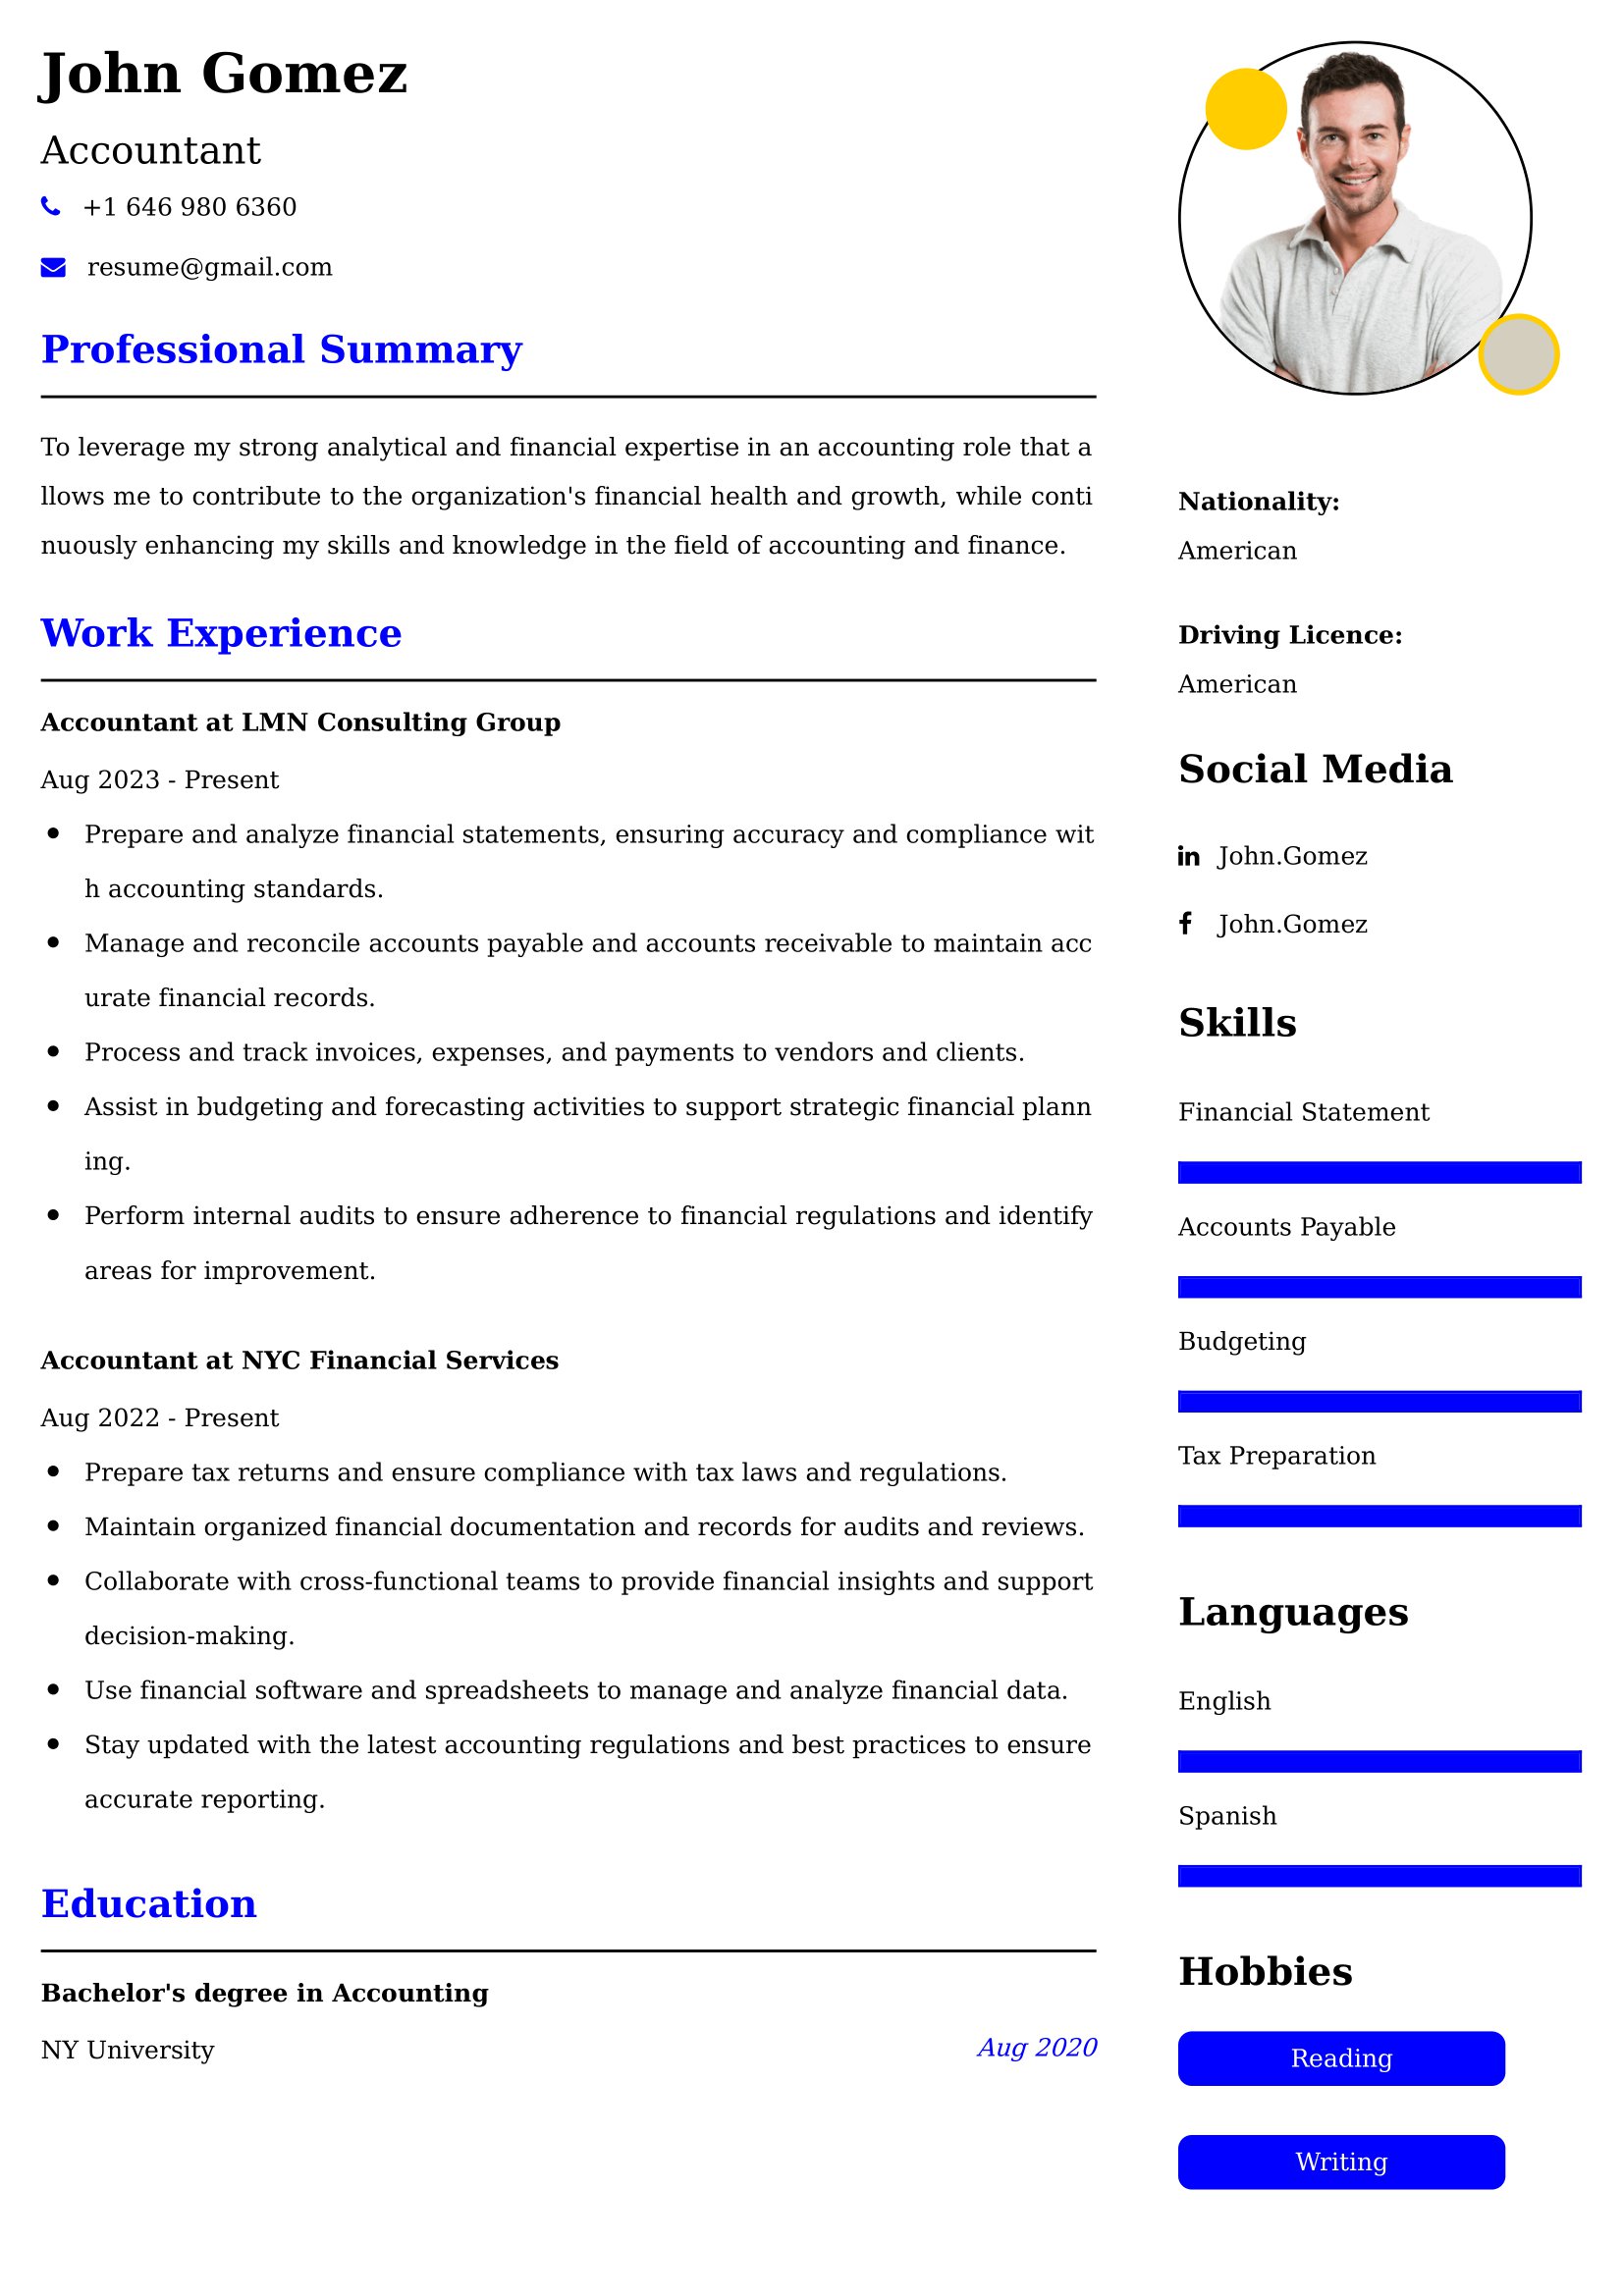 42+ Professional Accounting Resume Examples, Latest CV Format